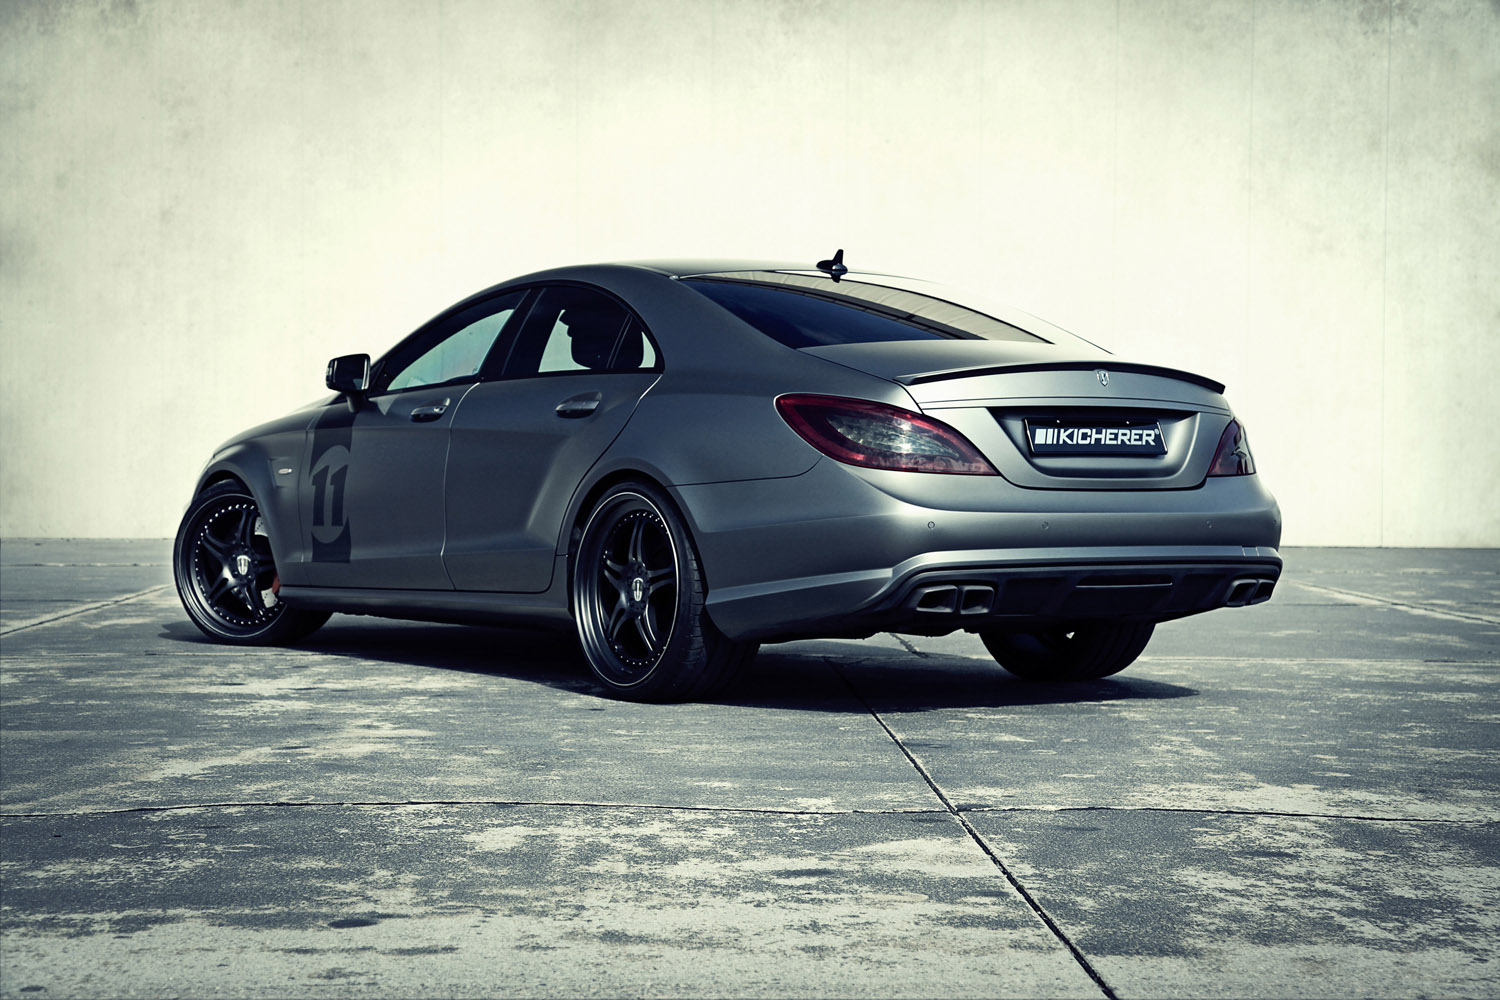 2013, Kicherer, Mercedes, Benz, Cls 63, Amg, Yachting, Cls, Tuning Wallpaper